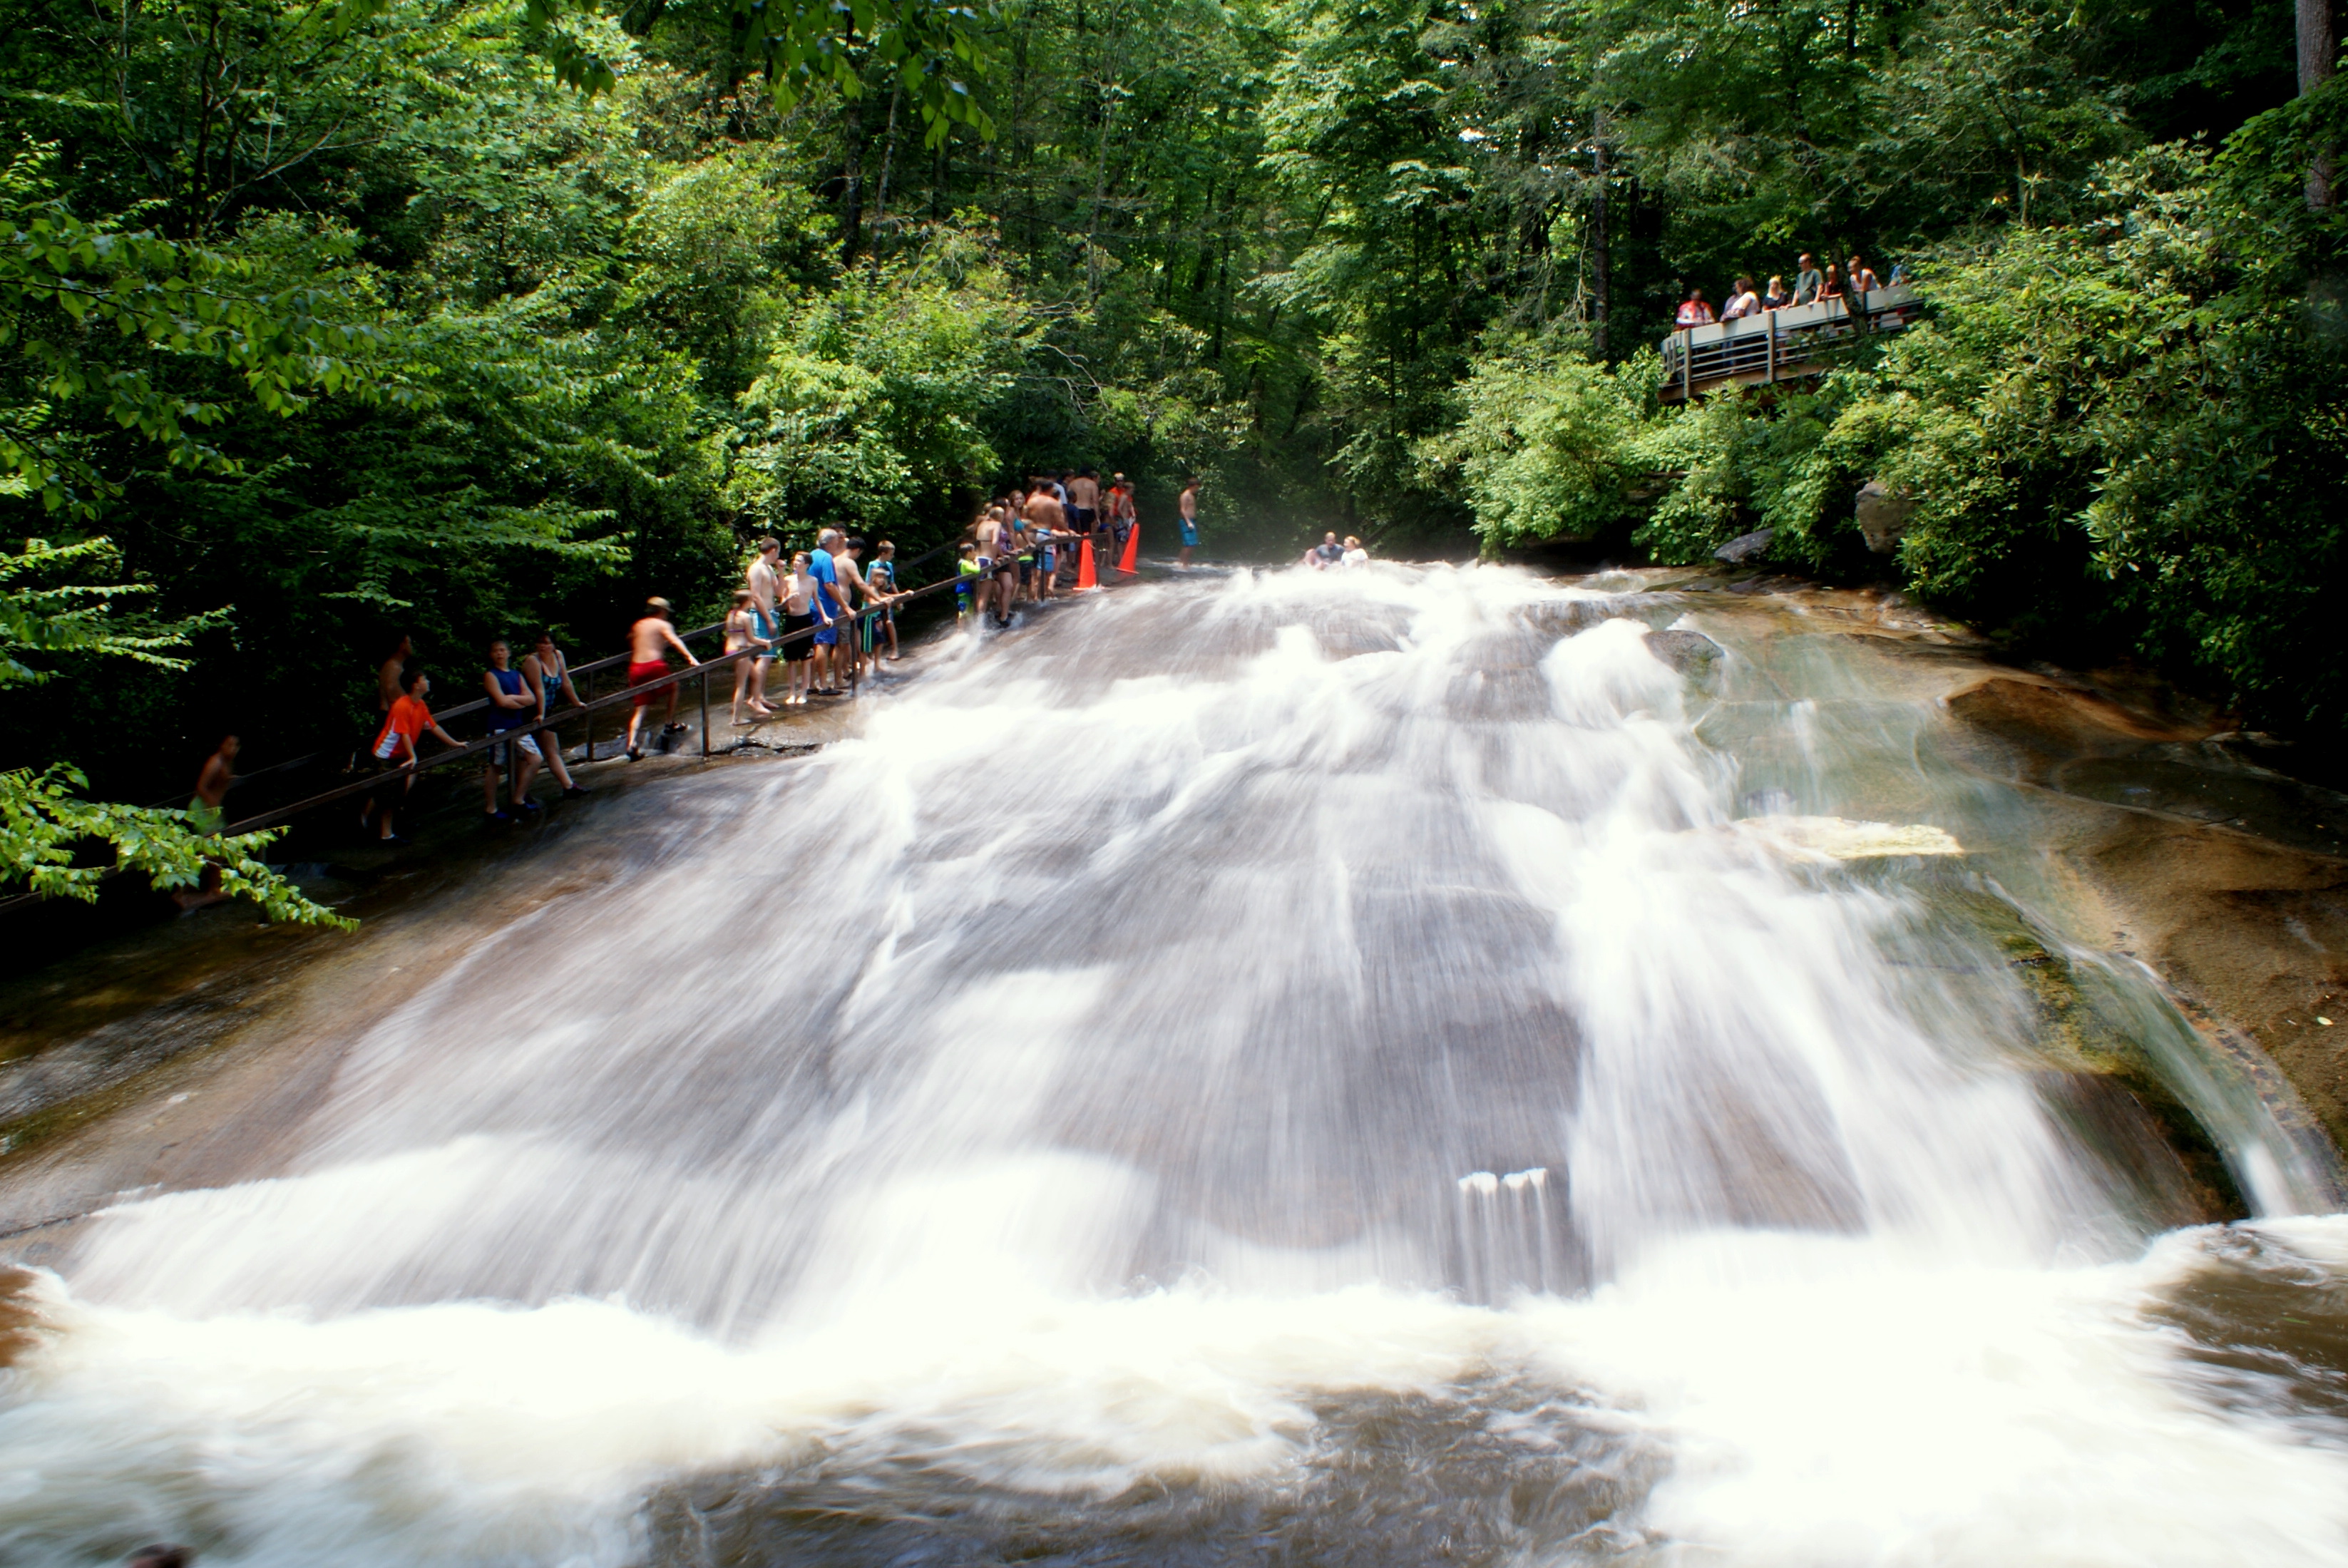 Water rushes down a smooth rock slope as bathers line up to ride it.